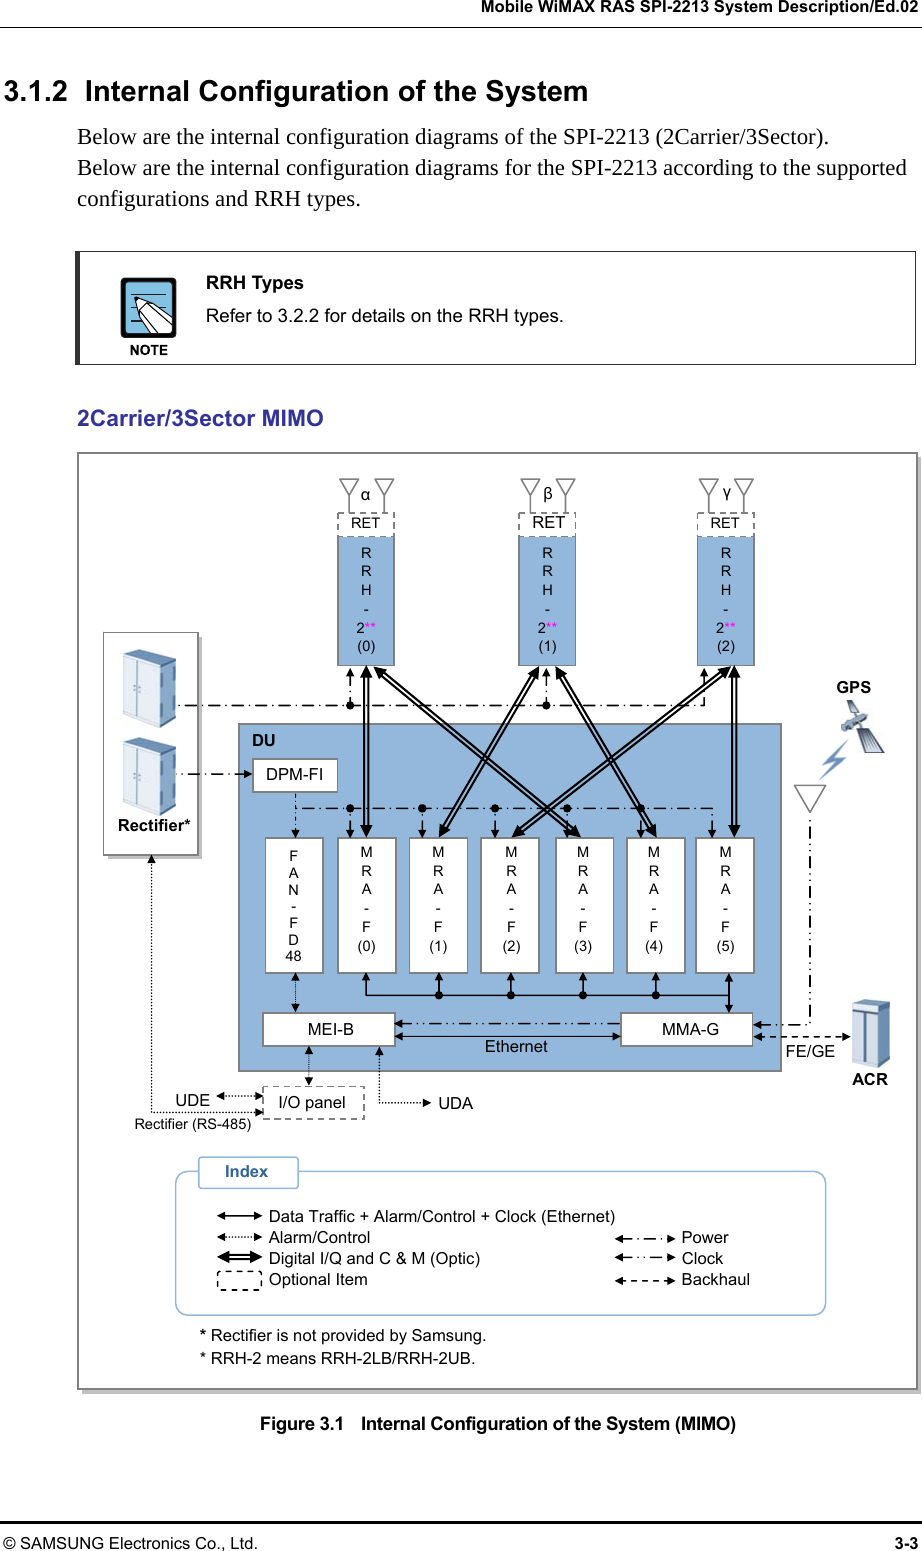   Mobile WiMAX RAS SPI-2213 System Description/Ed.02 © SAMSUNG Electronics Co., Ltd.  3-3 3.1.2  Internal Configuration of the System Below are the internal configuration diagrams of the SPI-2213 (2Carrier/3Sector). Below are the internal configuration diagrams for the SPI-2213 according to the supported configurations and RRH types.   RRH Types   Refer to 3.2.2 for details on the RRH types.    2Carrier/3Sector MIMO   Figure 3.1    Internal Configuration of the System (MIMO) αβγ R R H - 2**(0) RETR R H - 2**(1) RETR R H - 2** (2) RET DU DPM-FI F A N - F D 48 M R A - F (0) EthernetUDE Rectifier (RS-485) UDAM R A - F (1) M R A - F (2) M R A - F (3) M R A - F (4) M R A - F (5) MMA-G MEI-BFE/GE I/O panelACRRectifier*Data Traffic + Alarm/Control + Clock (Ethernet) Alarm/Control Power Digital I/Q and C &amp; M (Optic)  Clock Optional Item  Backhaul Index * Rectifier is not provided by Samsung.   * RRH-2 means RRH-2LB/RRH-2UB. GPS